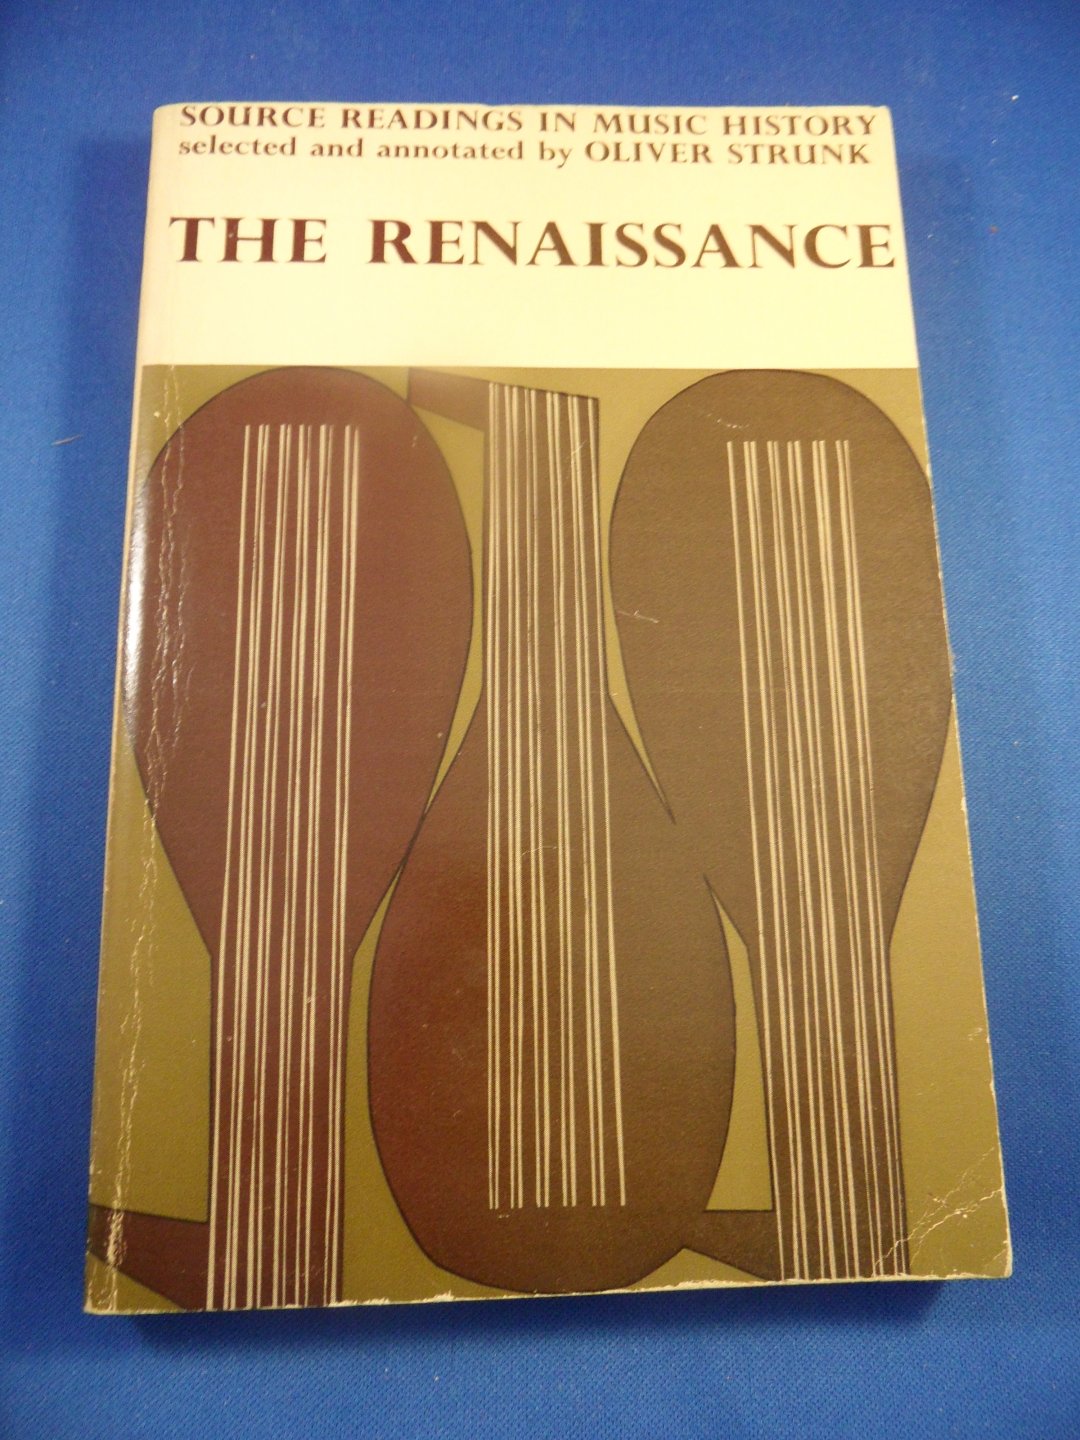 Strunk, Oliver - The renaissance. Source readings in music history.